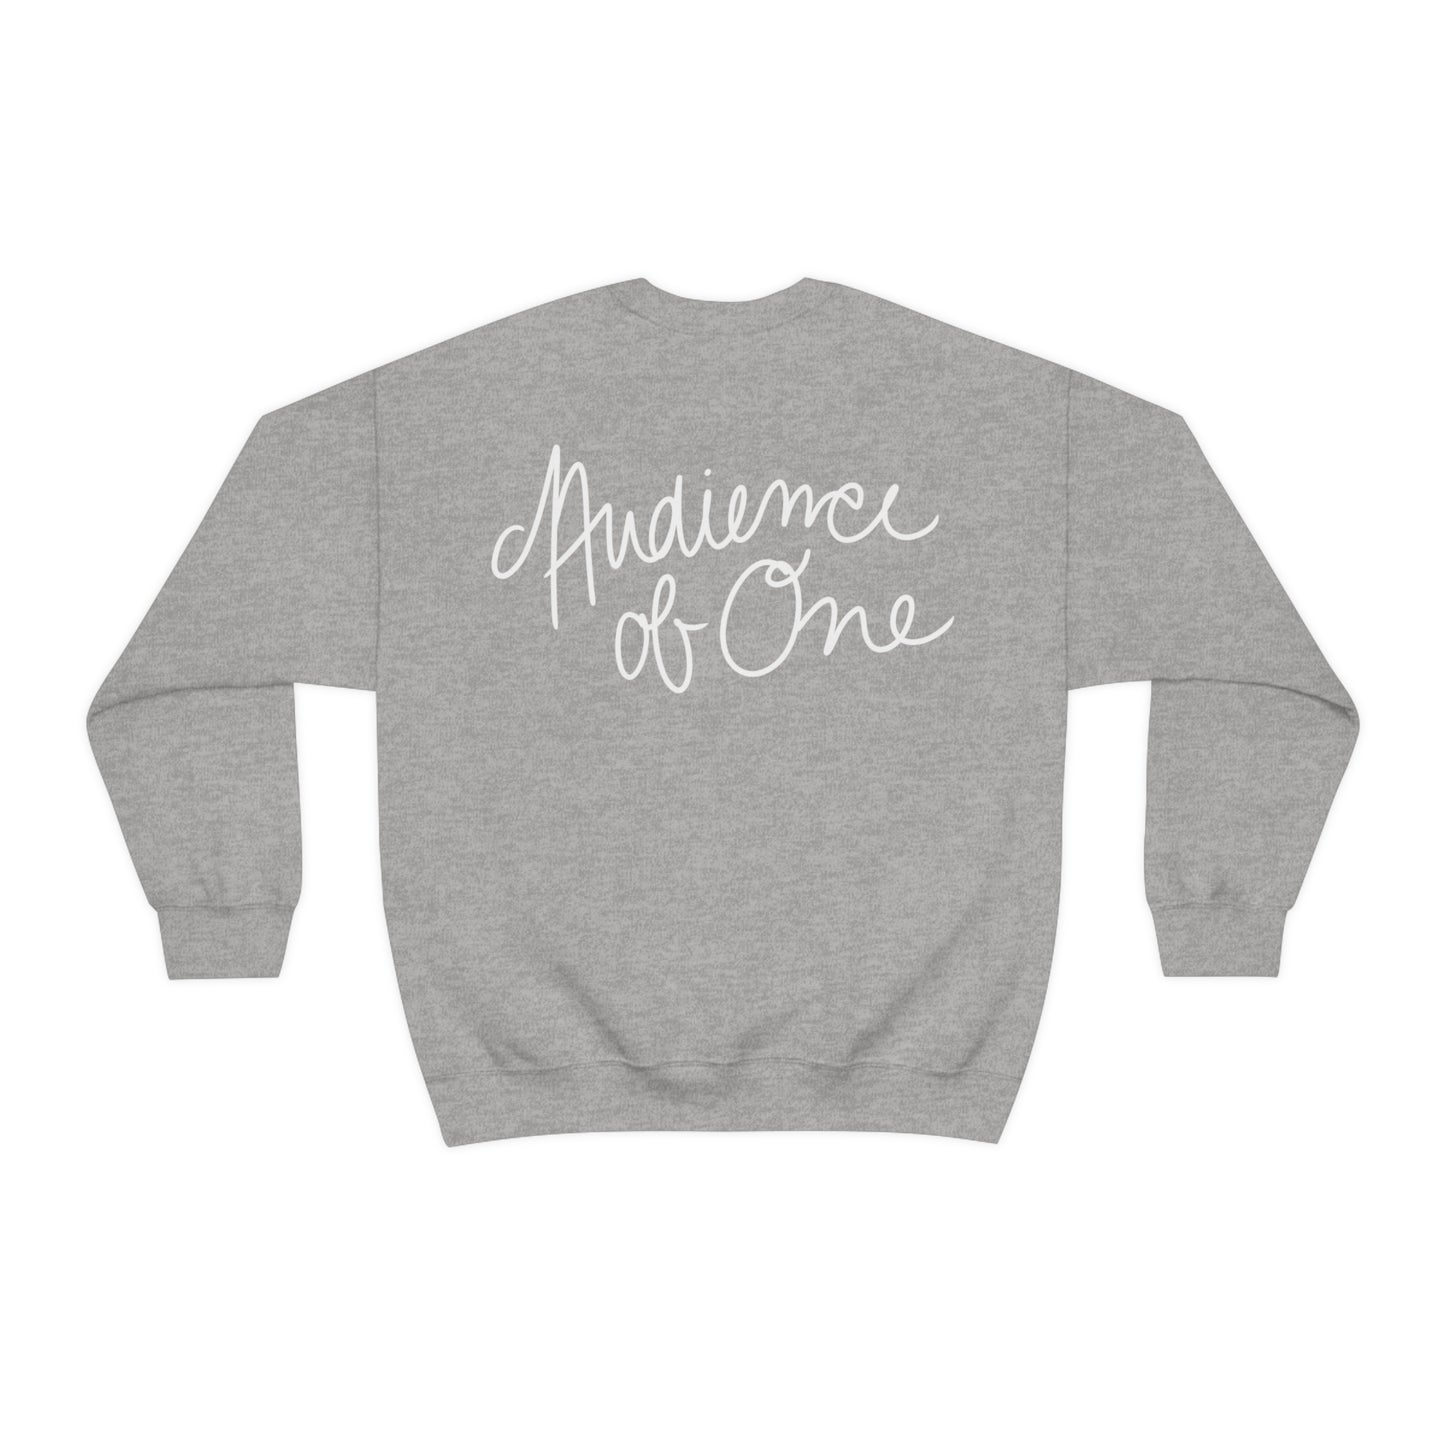 Paige Bachman: Audience of One Crewneck